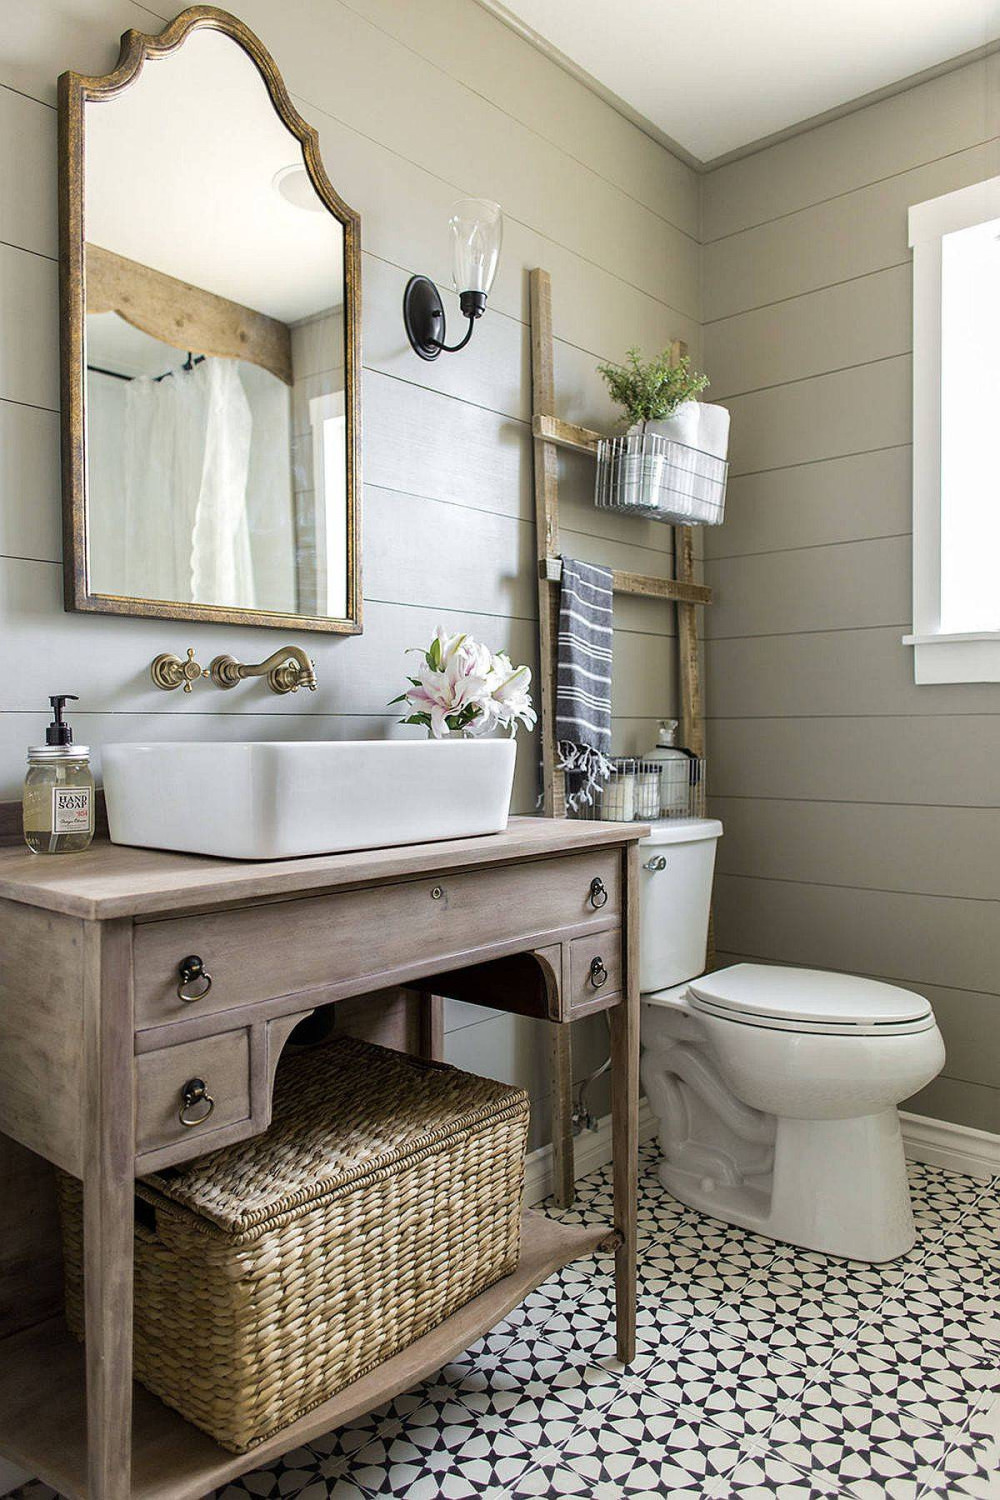 Best Small Farmhouse Bathroom Design Ideas with a Difference